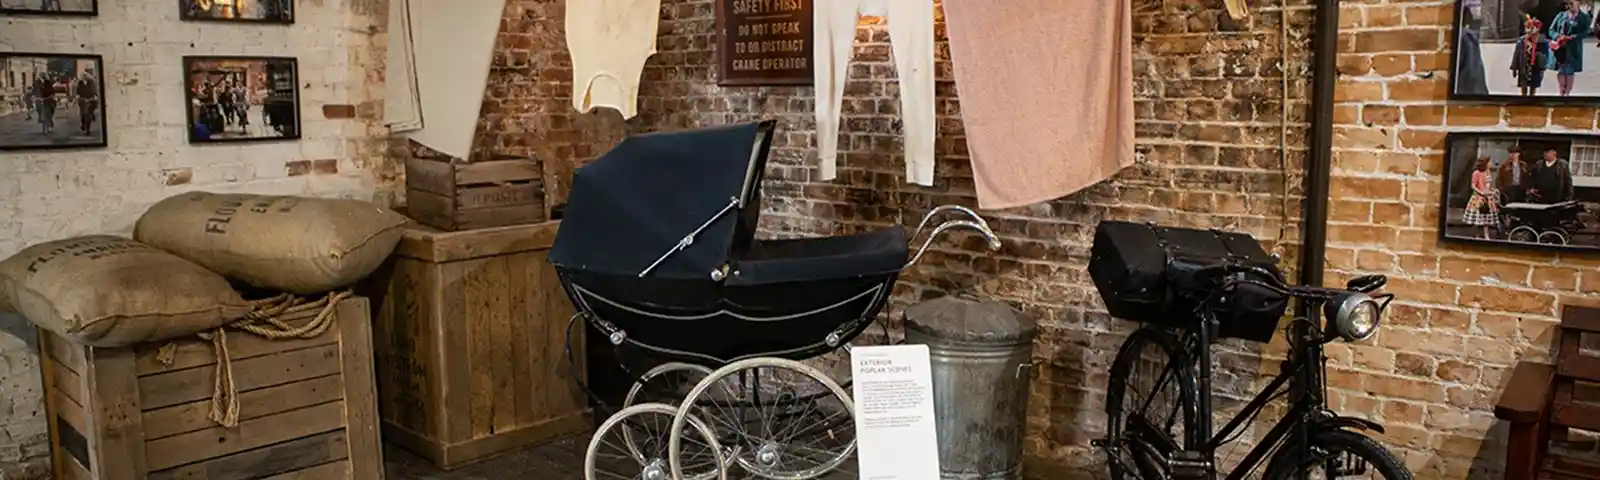 7. Call The Midwife Gallery At The Historic Dockyard Chatham Street Scene